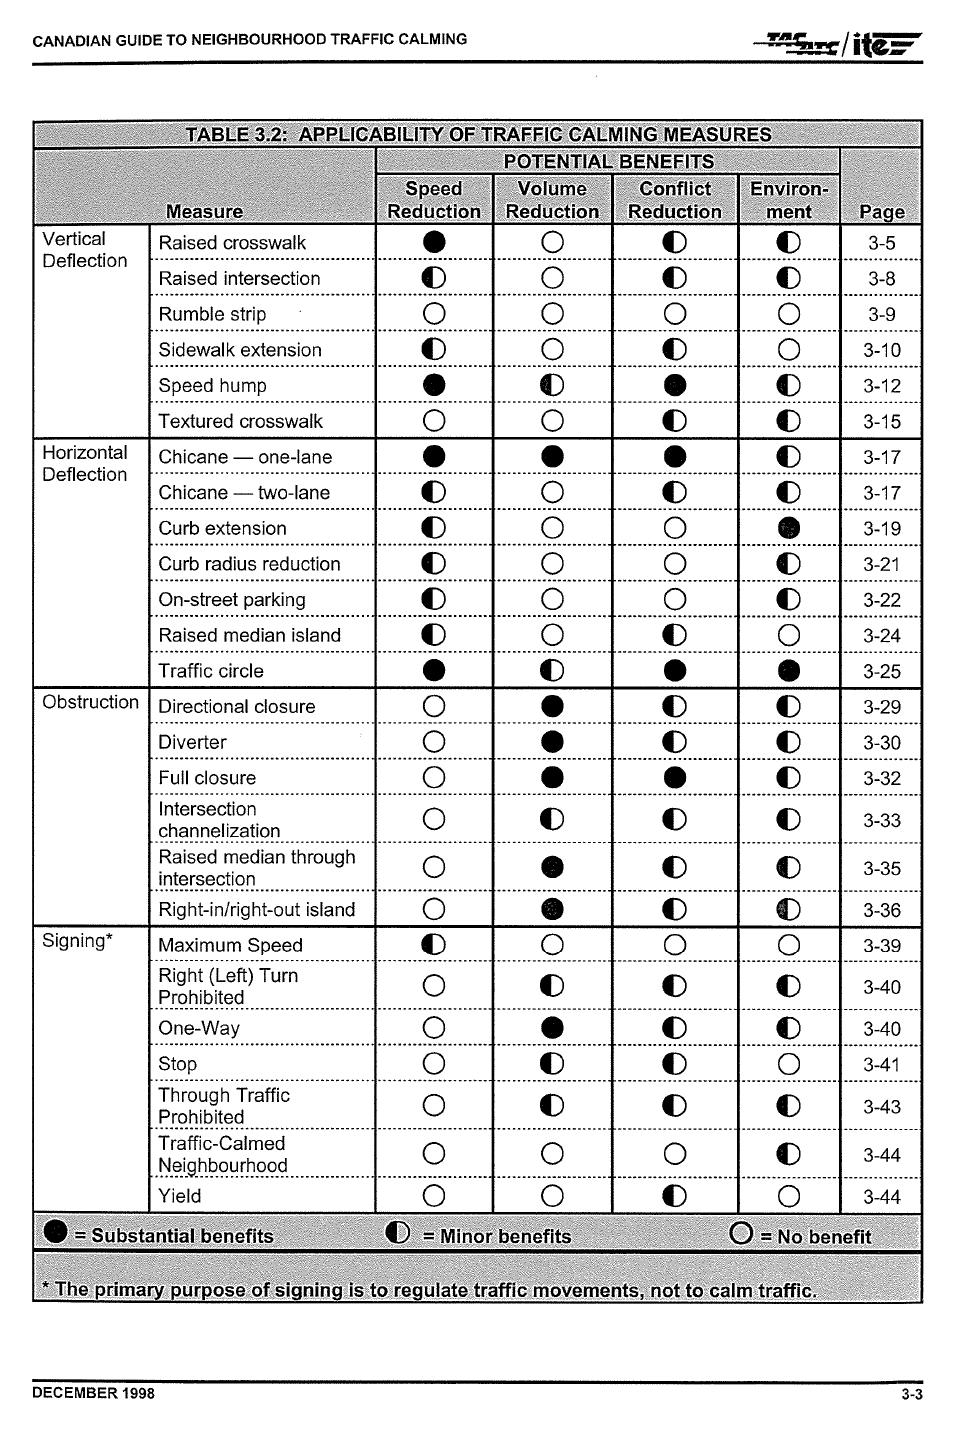 Appendix 1 TAC/ITE Canadian Guide to Neighbourhood Traffic Calming Reference Tables